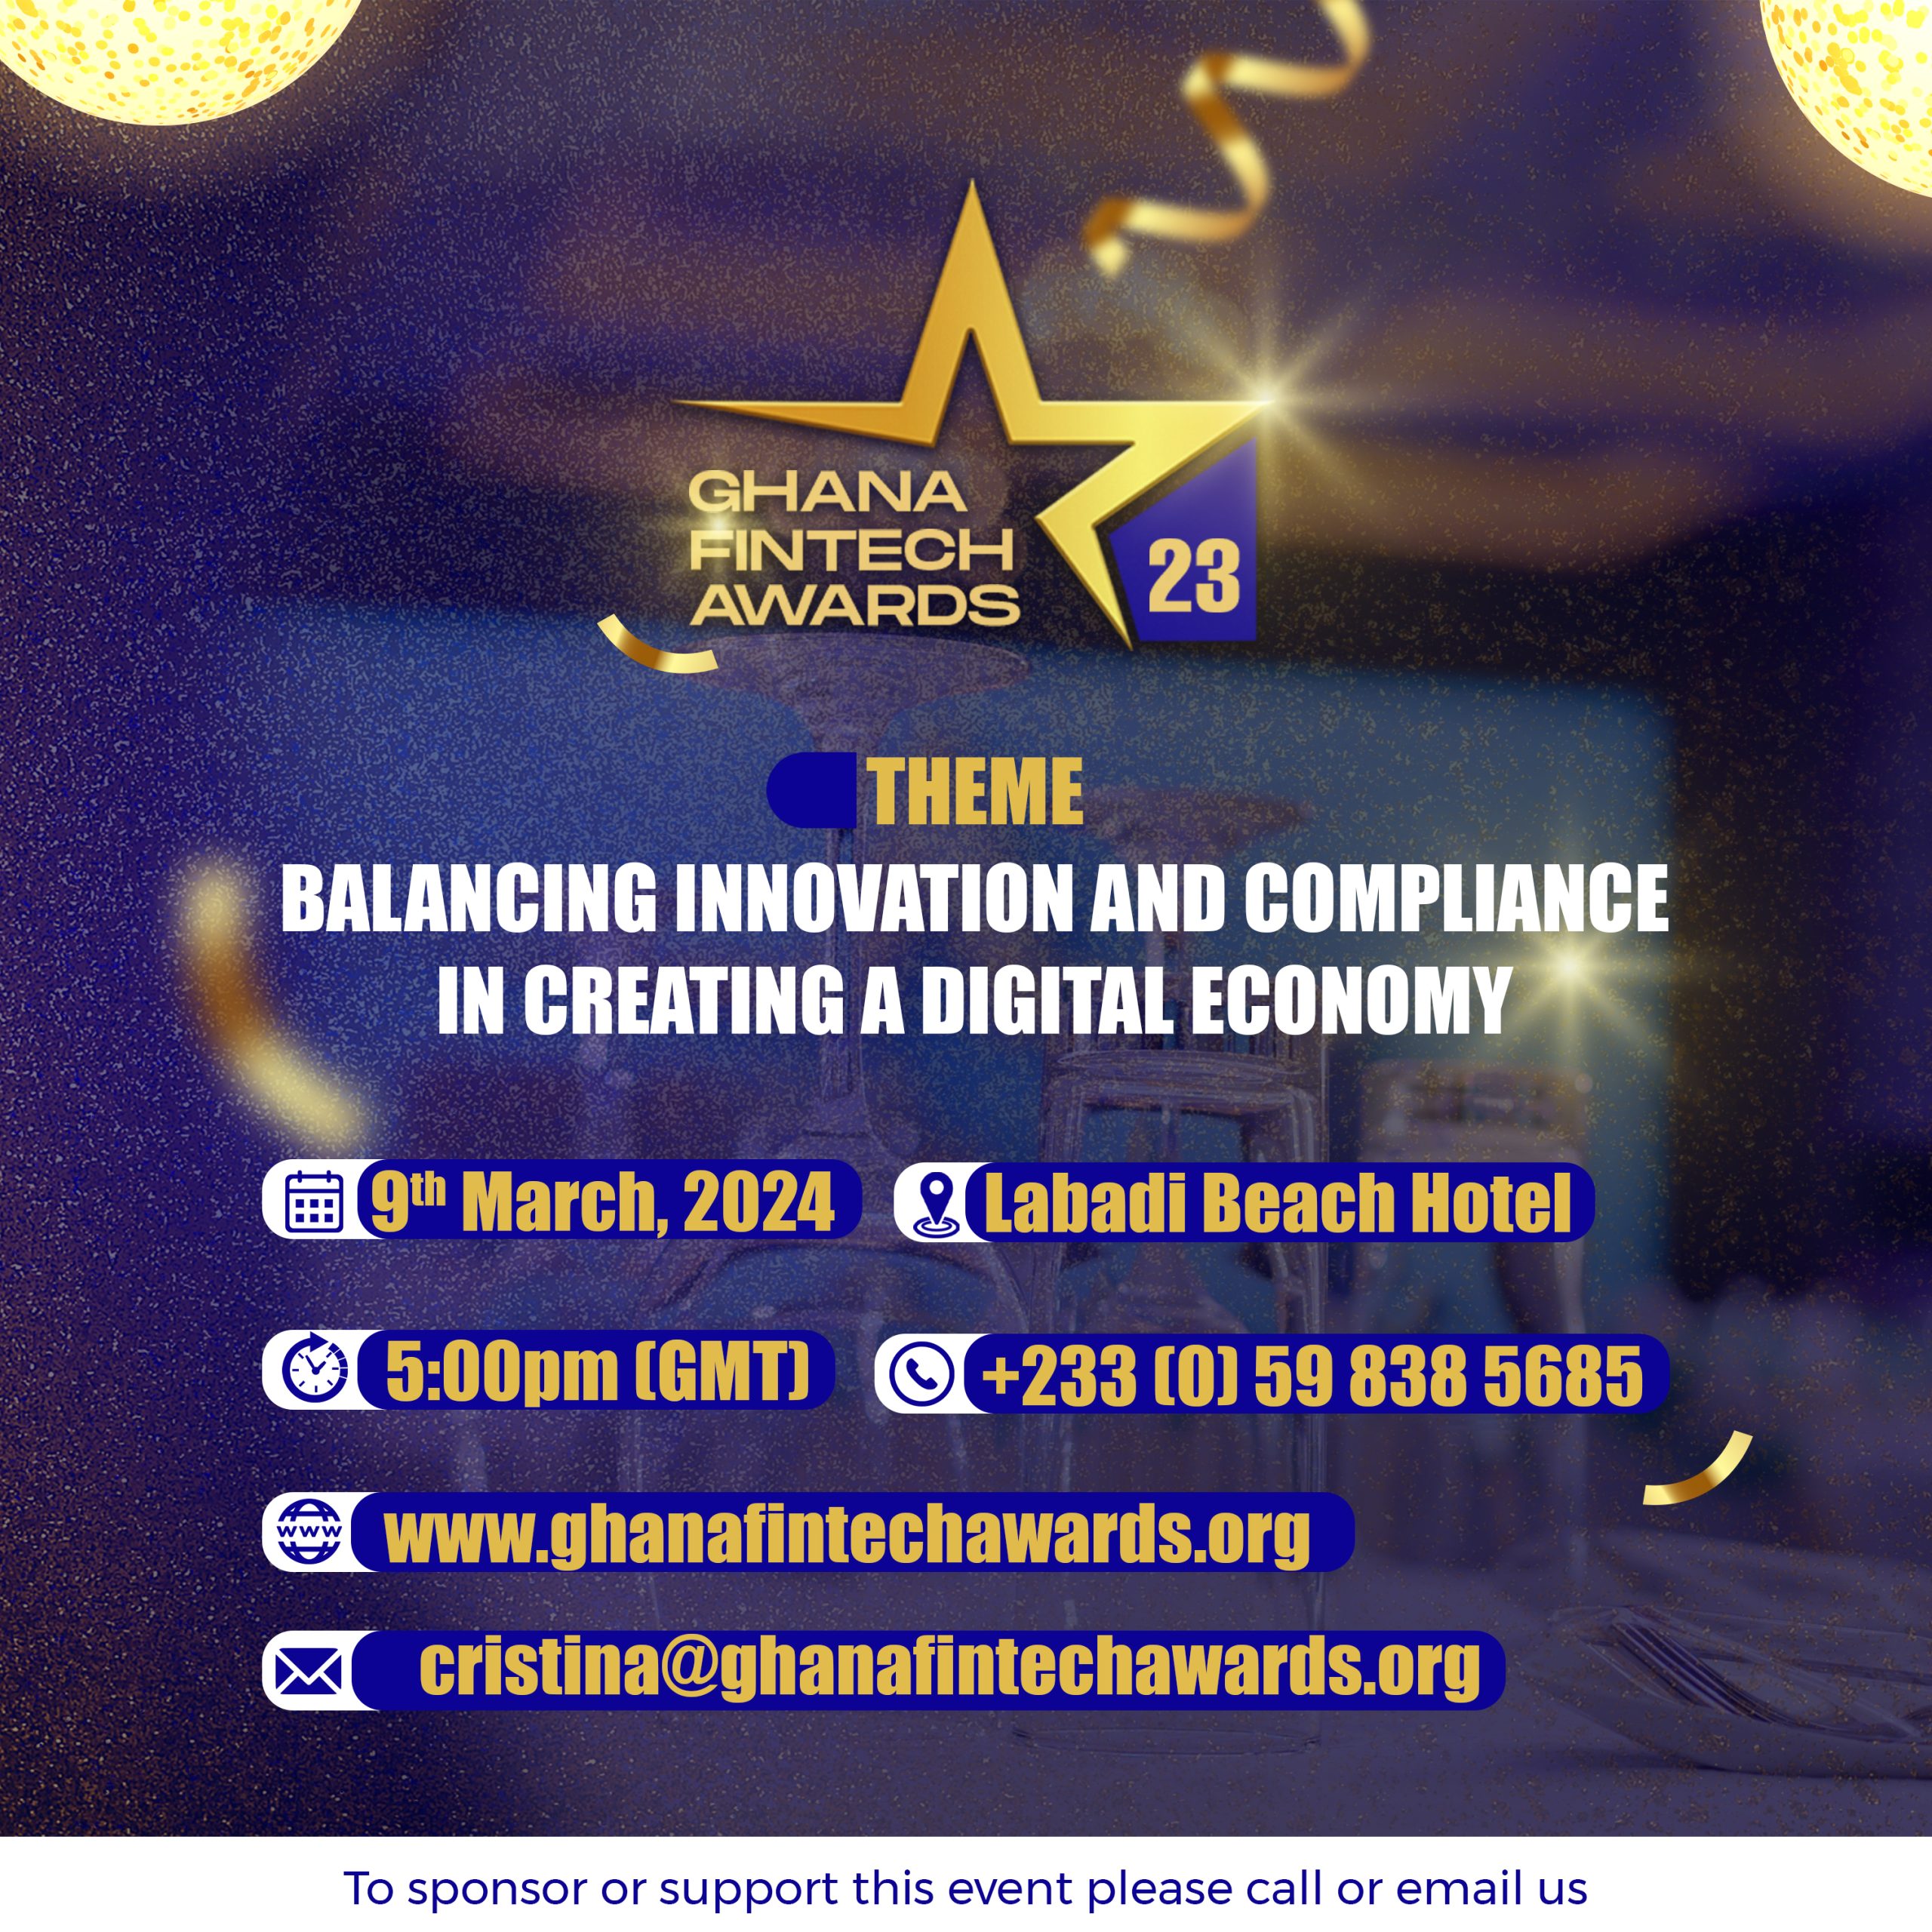 Ghana Fintech Awards unveils voting stage for its 3rd annual event